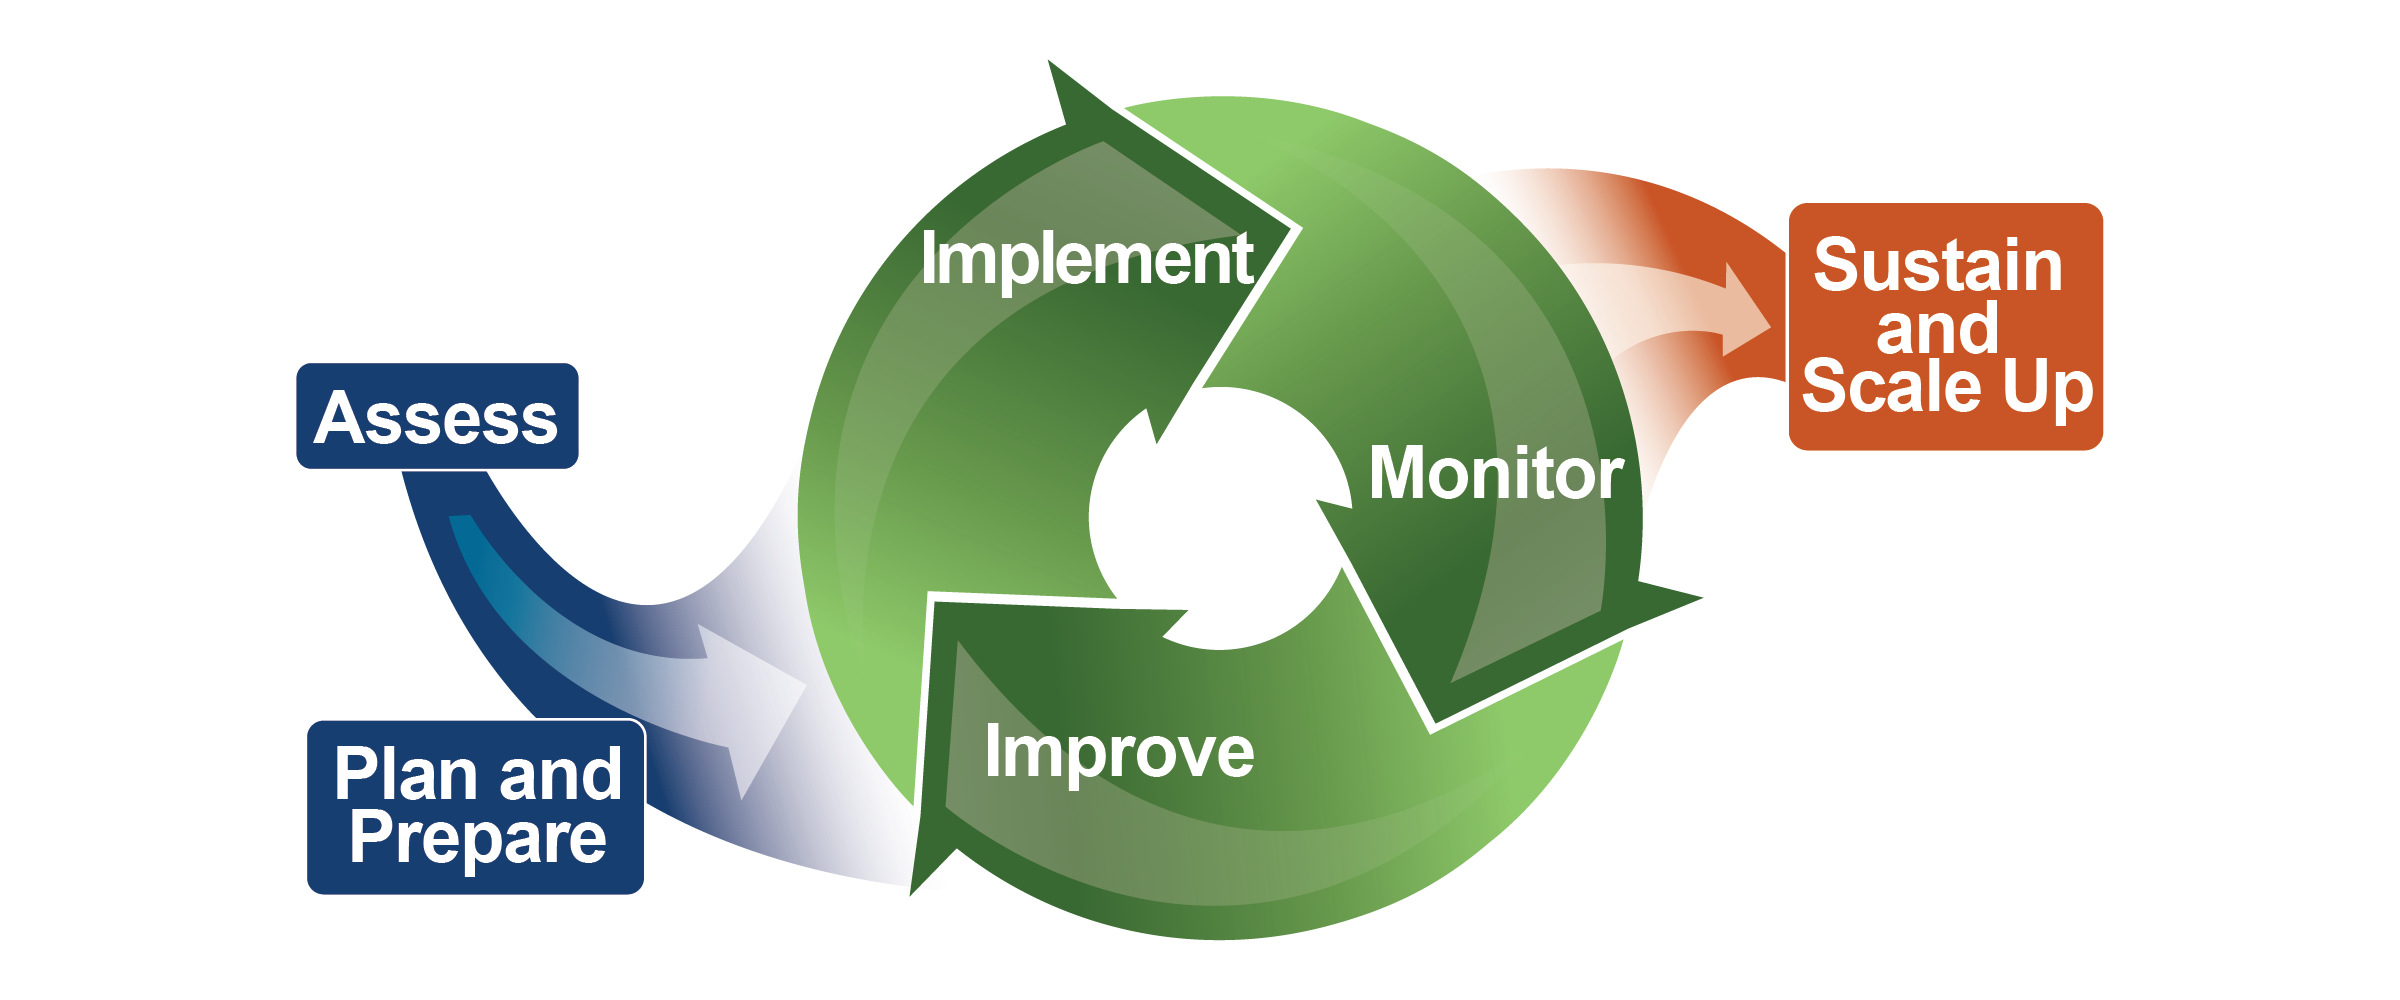 The three-phase technical assistance model. Assess plus Plan and Prepare feed into a continuous cycle of Implement, Monitor, and Improve. The output is Sustainability and Scale Up.